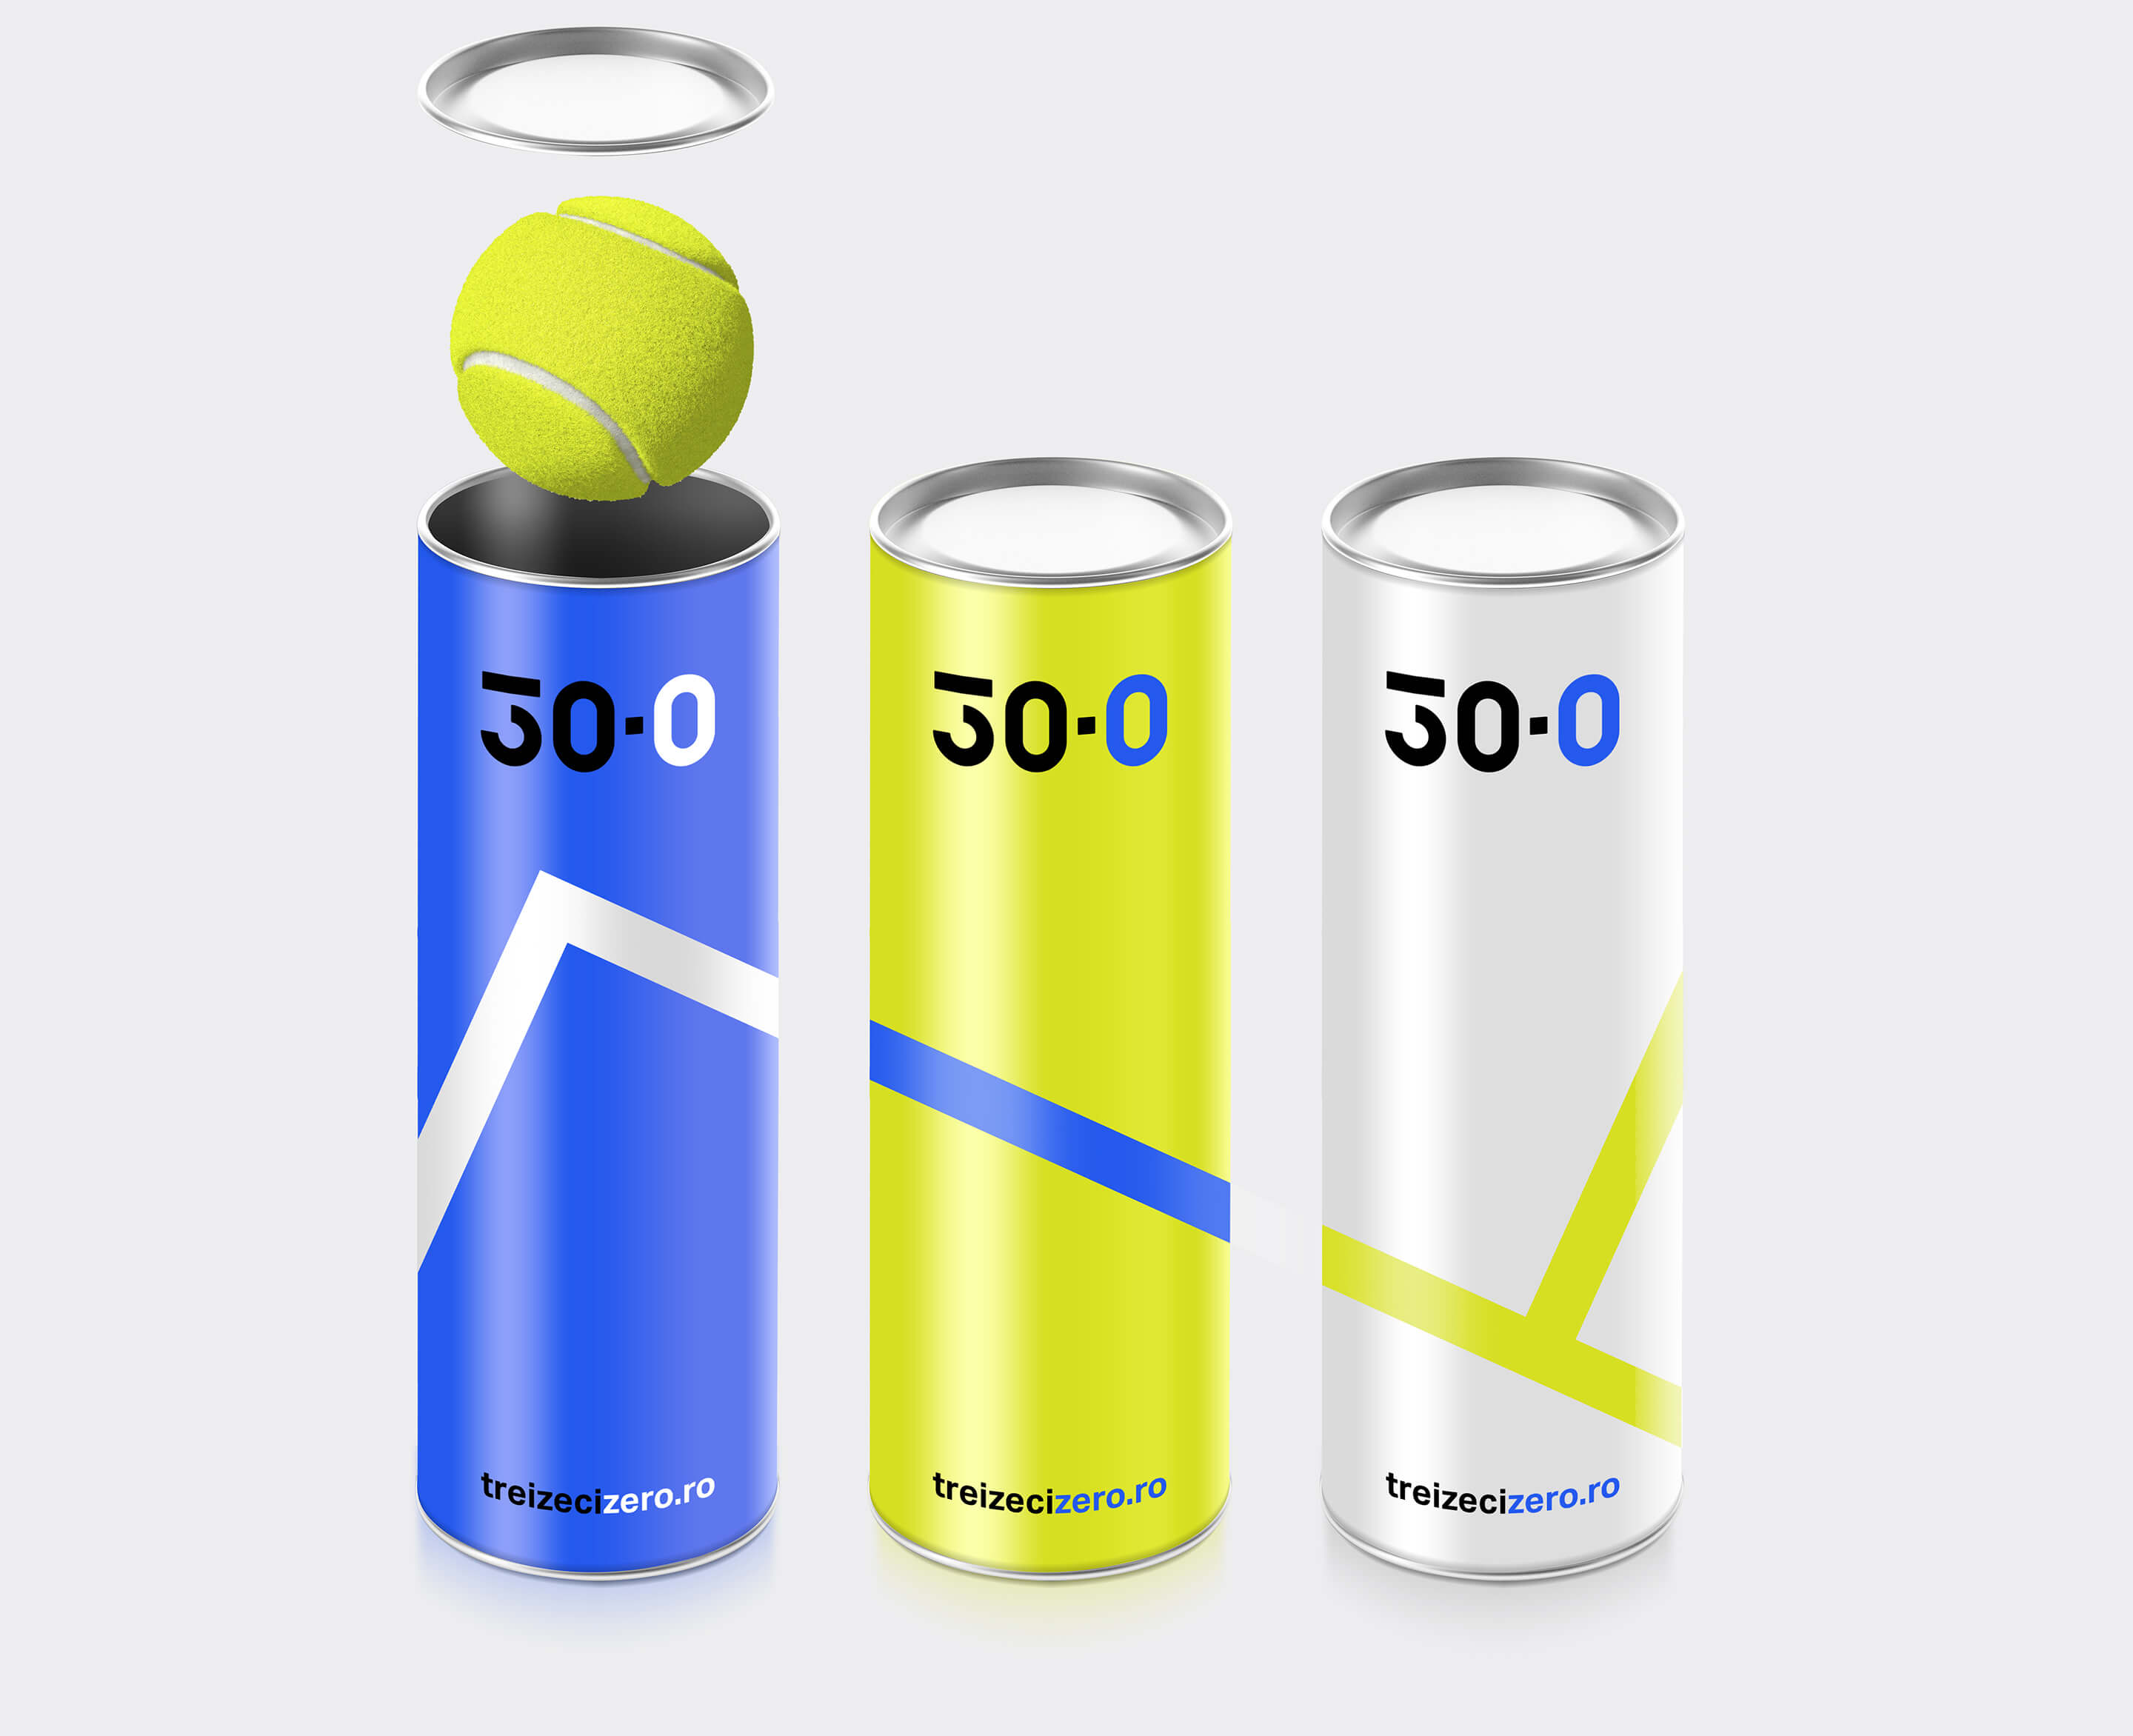 branded tennis ball cans